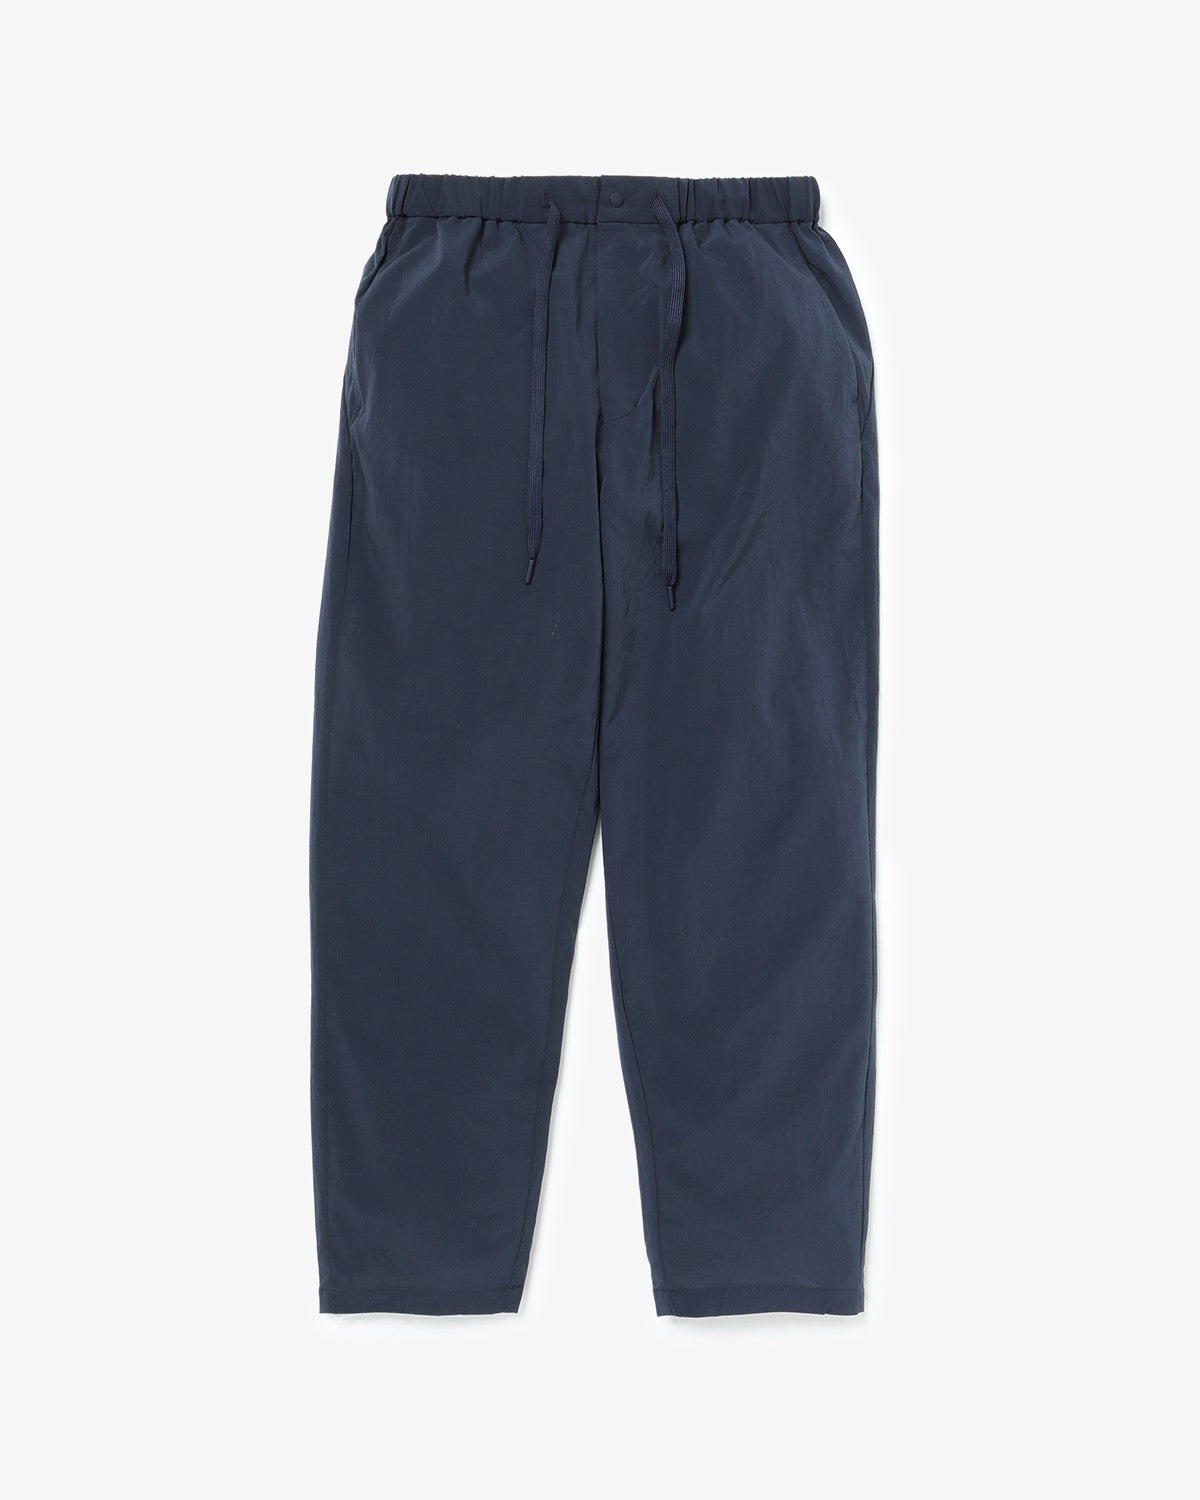 BREATHABLE QUICK DRY PANTS